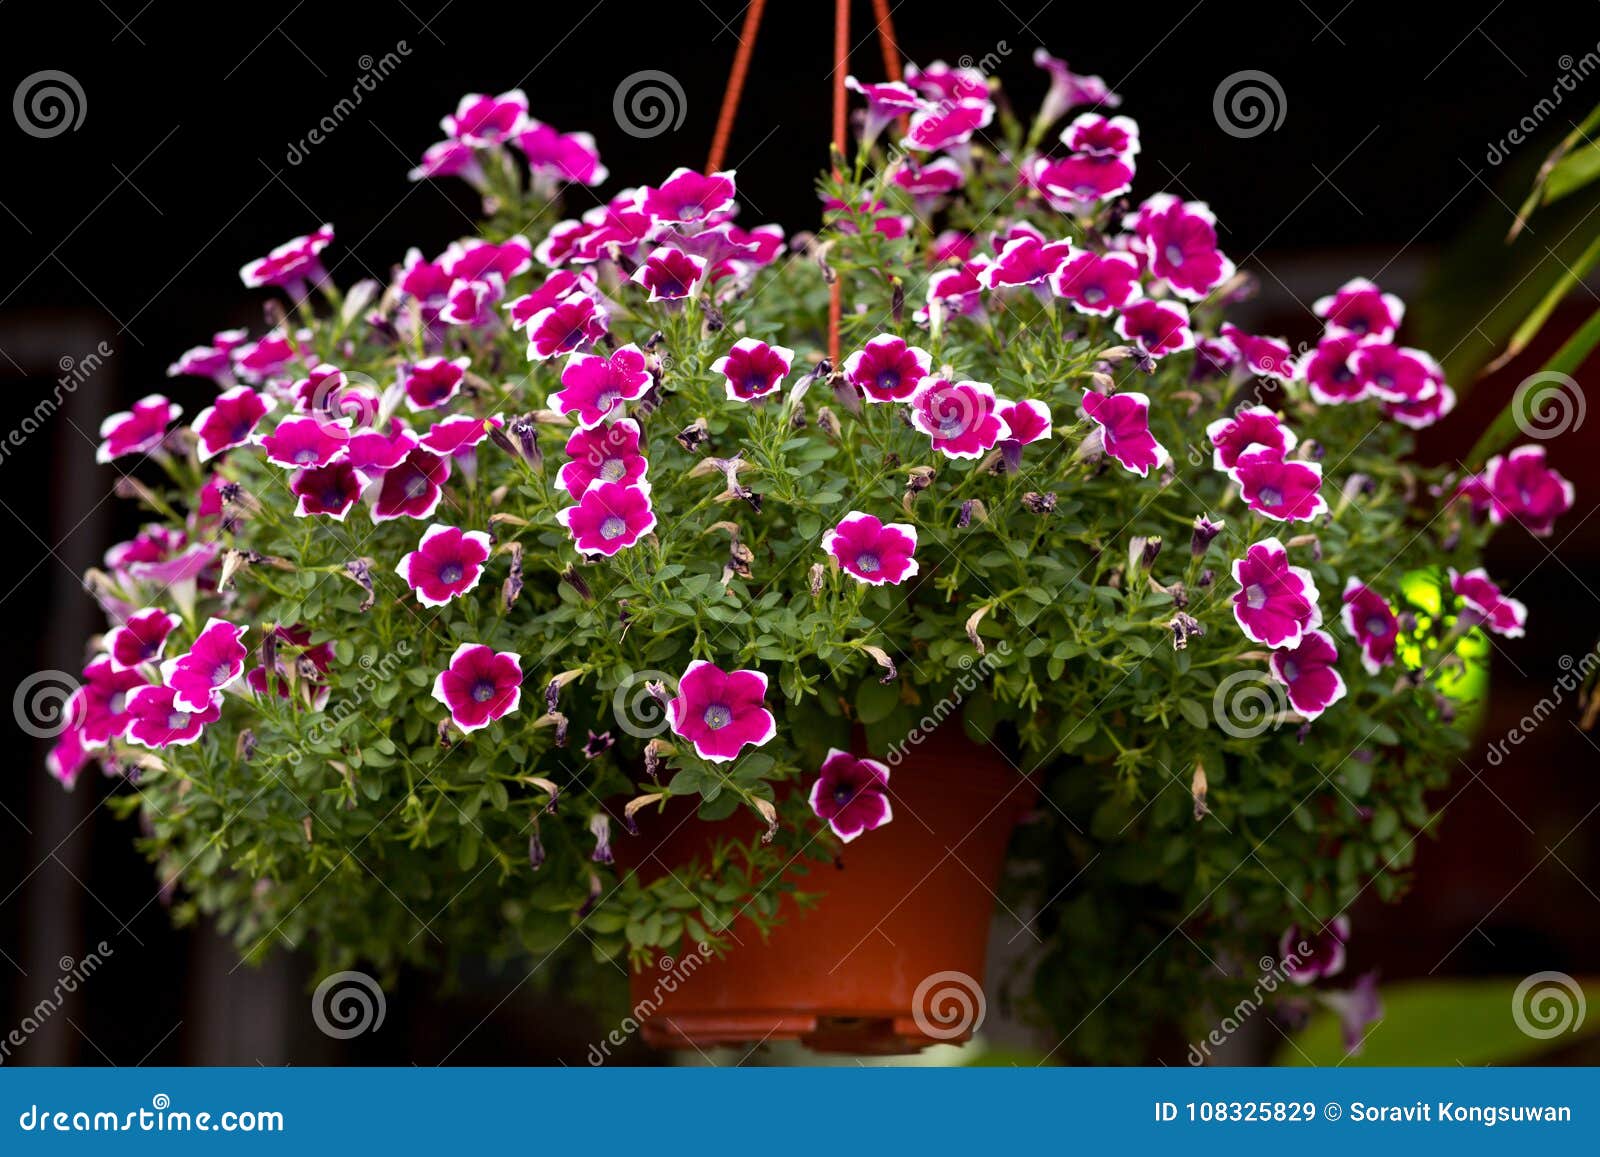 The Pink Little Flower in Hanging Flower Pot Stock Image - Image of ...